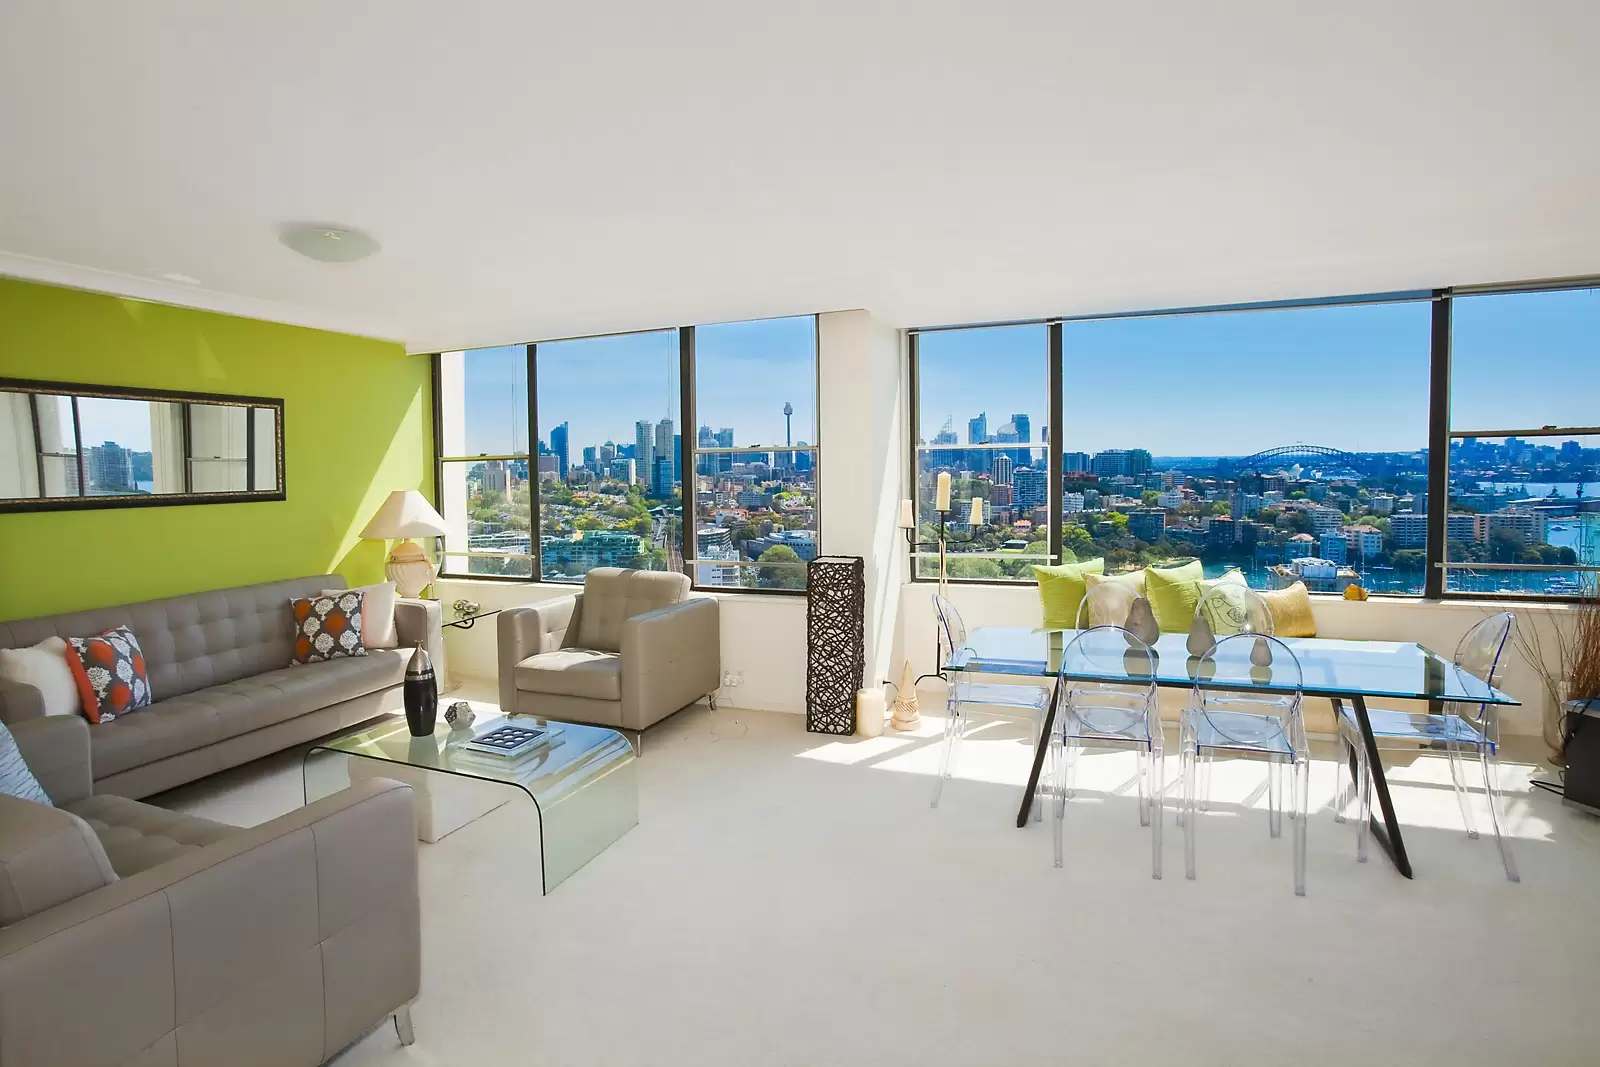 Photo #6: 15F/3 Darling Point Road, Darling Point - Sold by Sydney Sotheby's International Realty